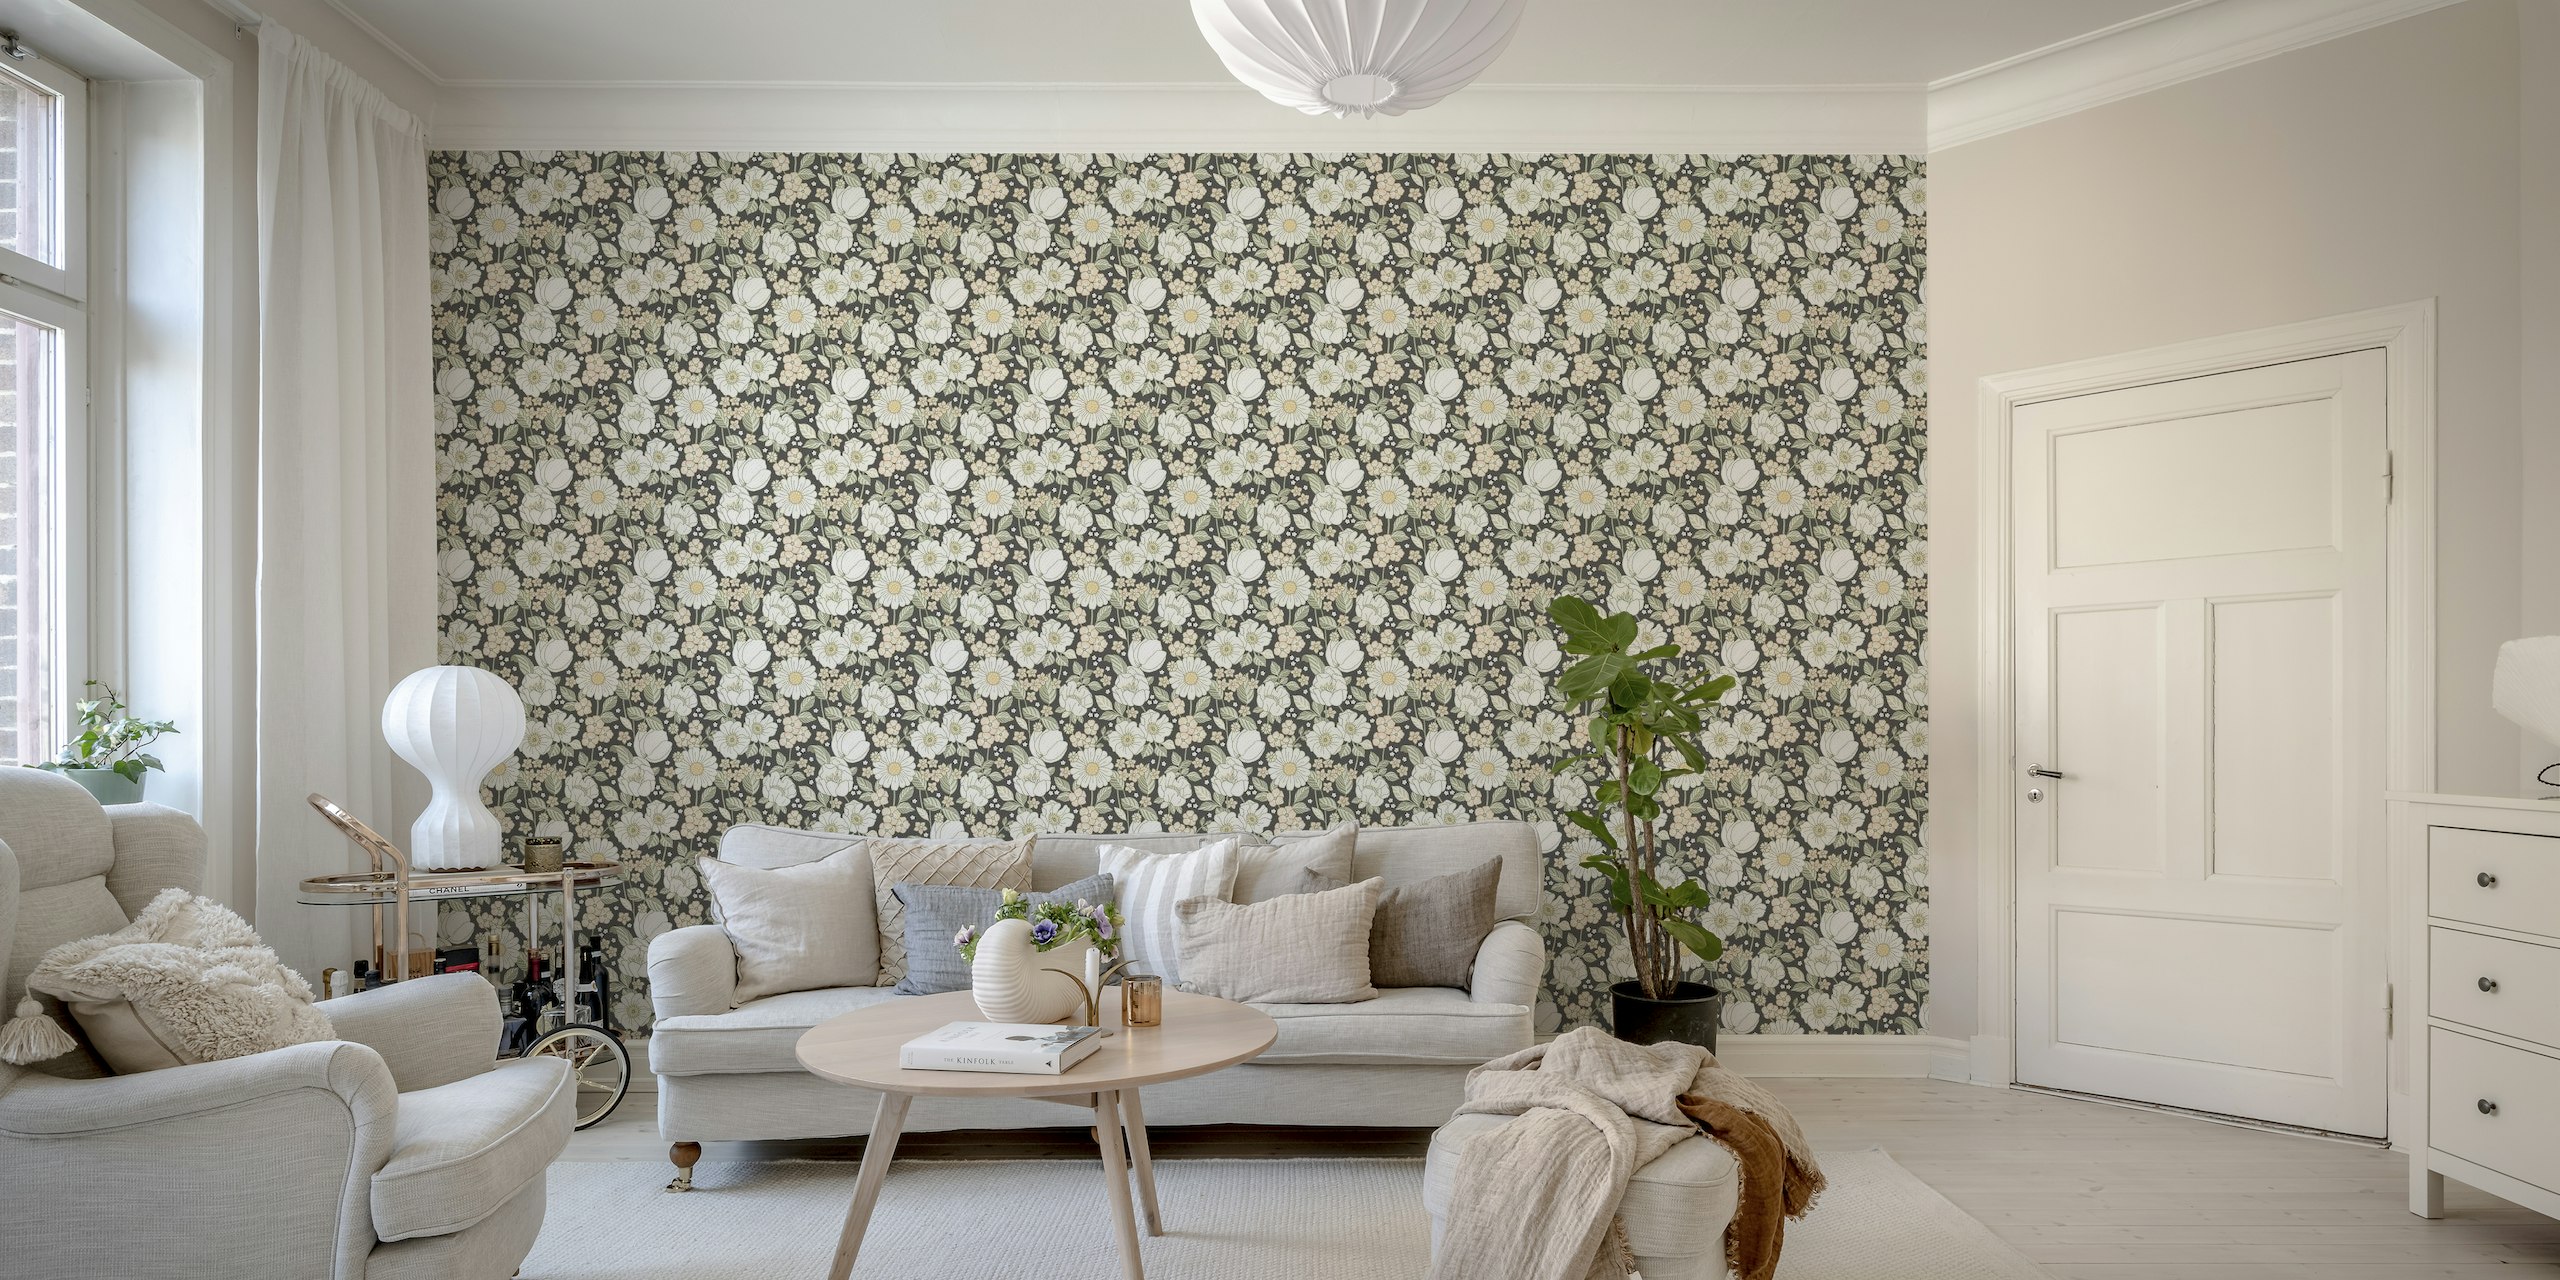 Garden Bloom Gray - Medium wall mural with gray foliage and white flowers